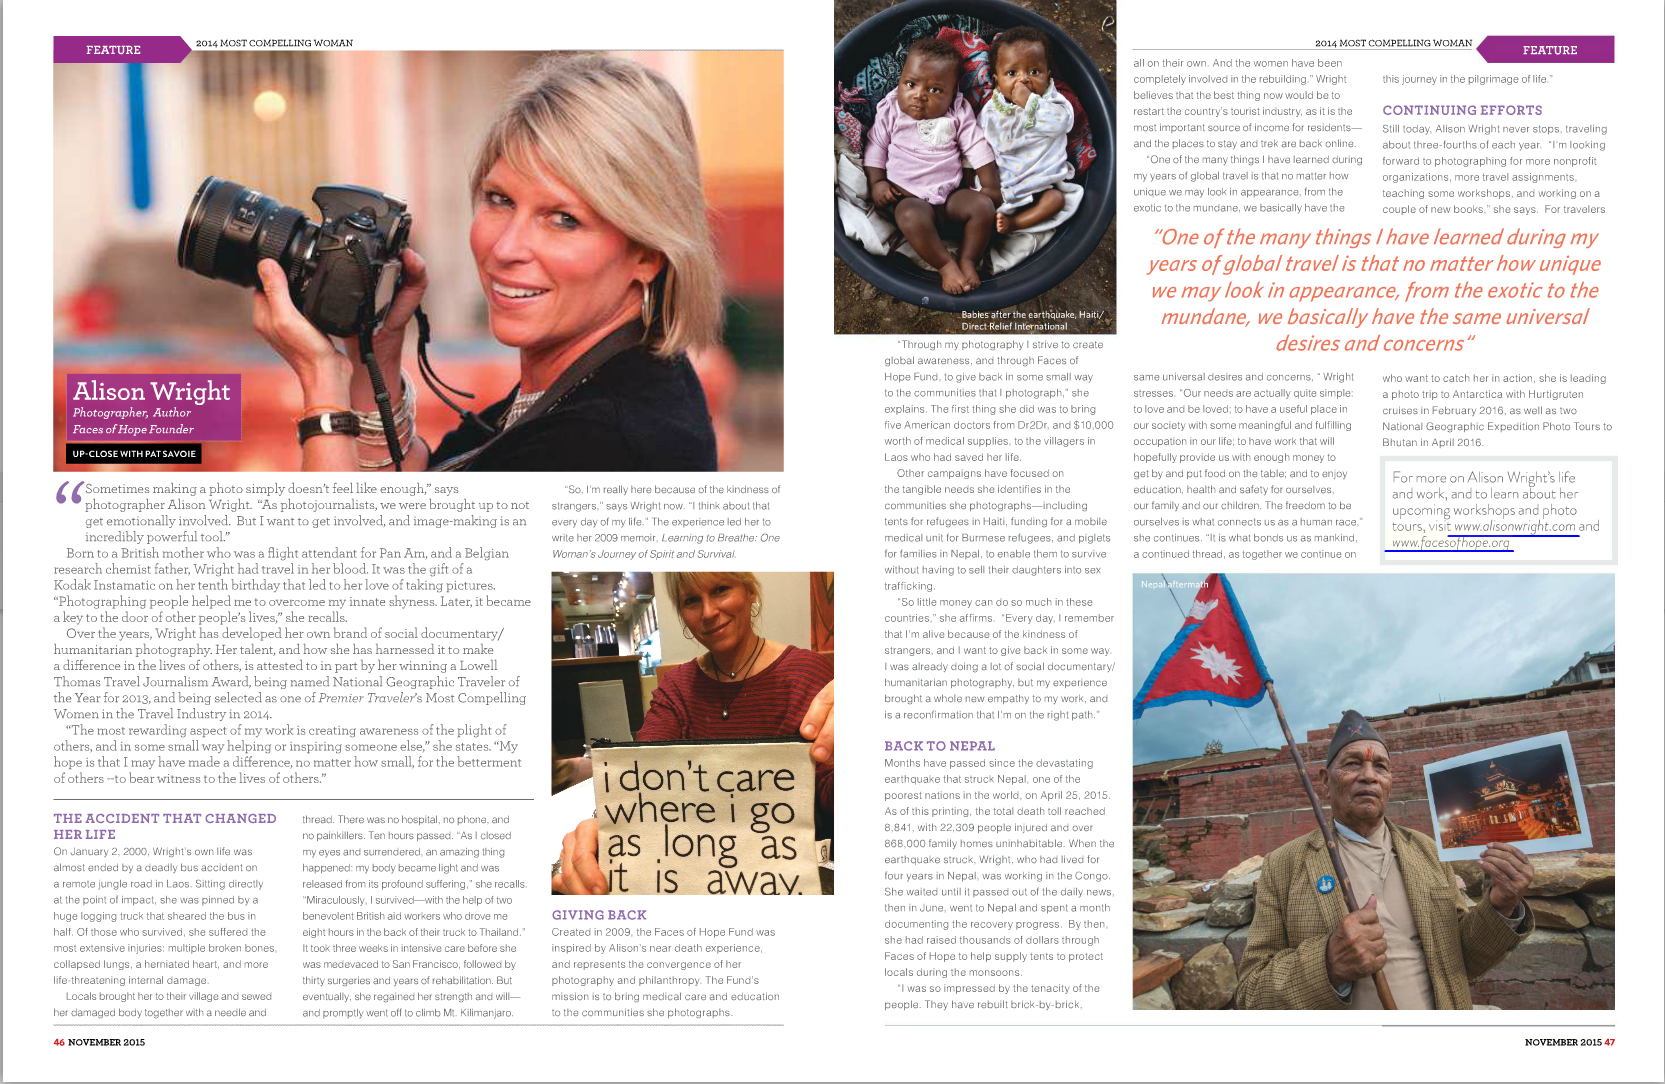 Premier Traveler Magazine interview as Most Compelling Woman in the Travel Industry, October/November 2015